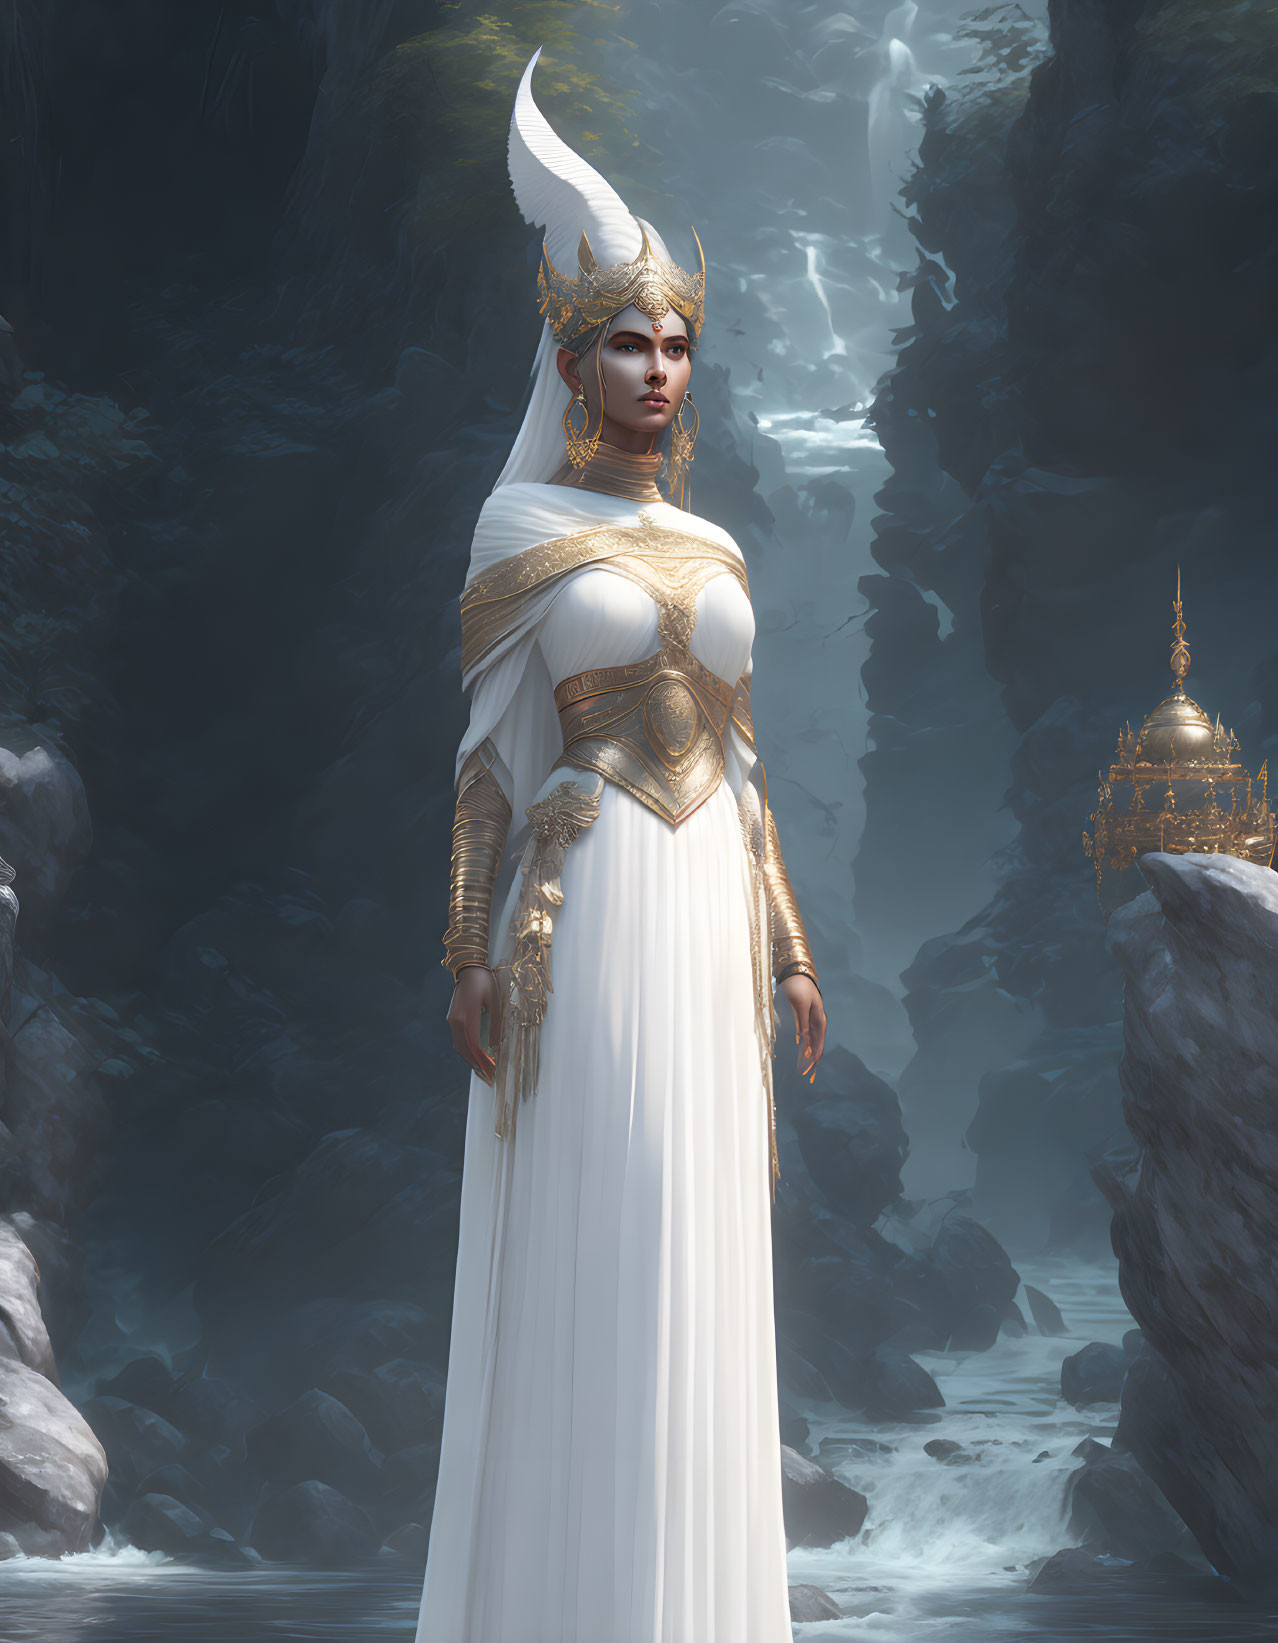 Woman in white and gold costume at waterfall in rocky landscape